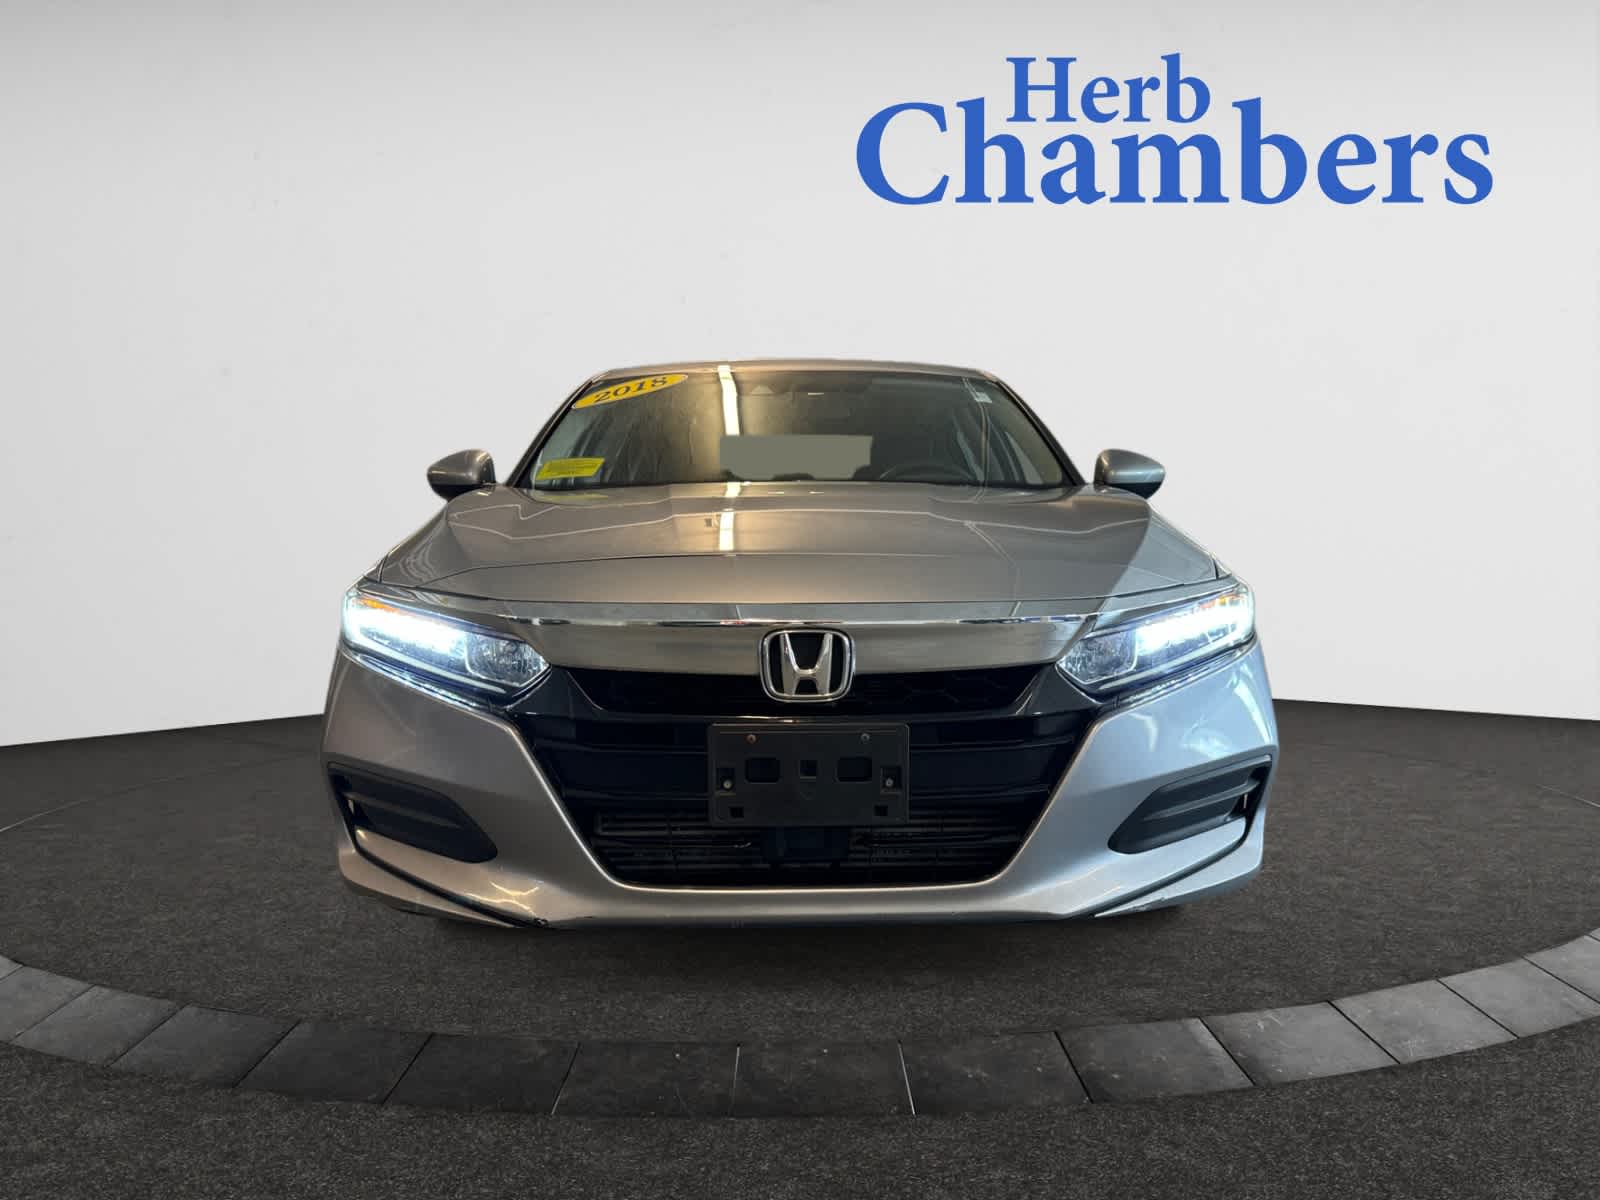 Used 2018 Honda Accord LX with VIN 1HGCV1F14JA083028 for sale in Brookline, MA